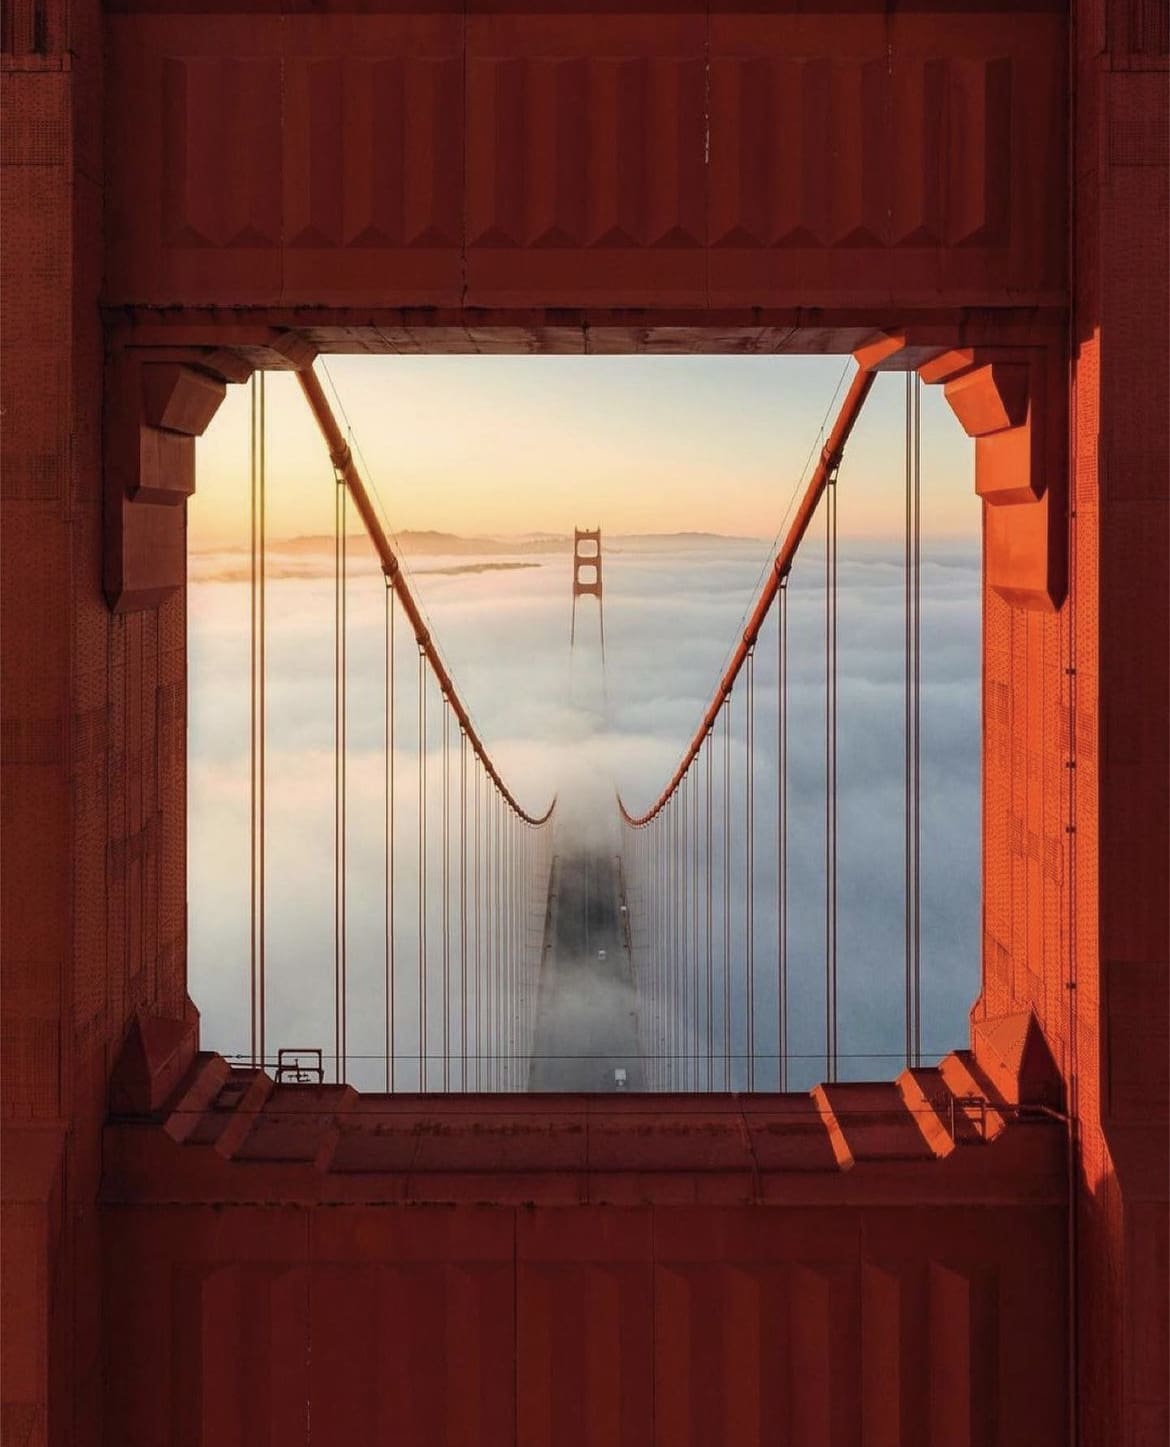 A different perspective of the Golden Gate Bridge